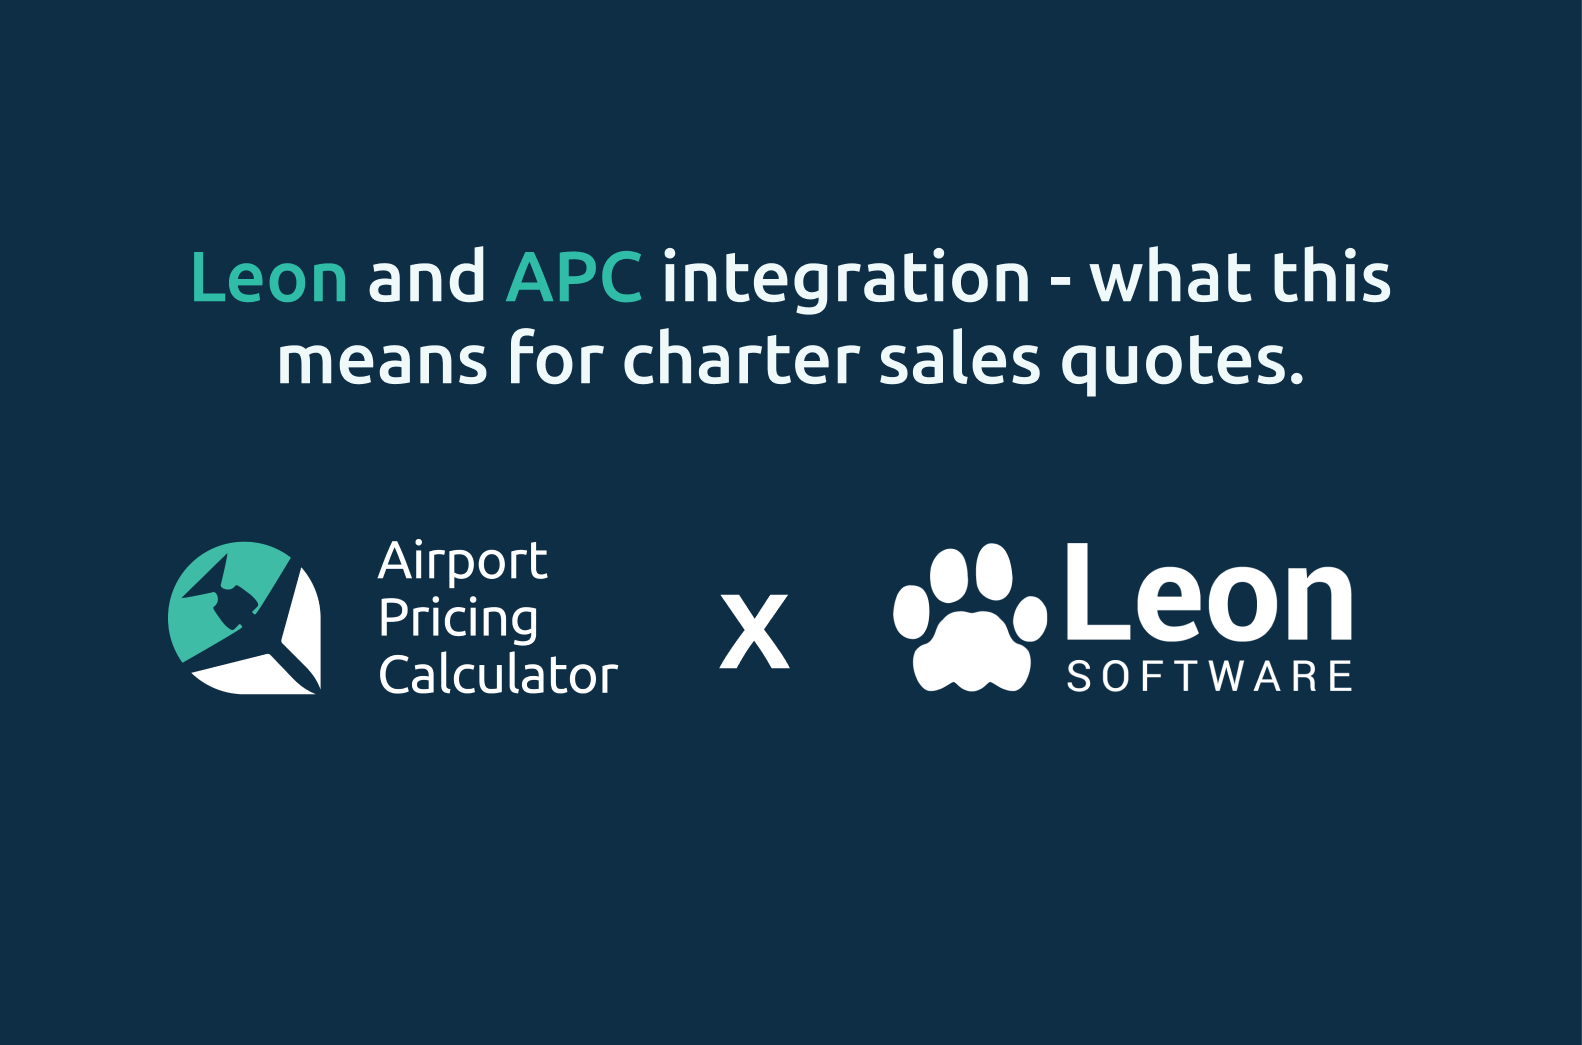 Banner image for Leon and APC and what it means for charter sales quotes